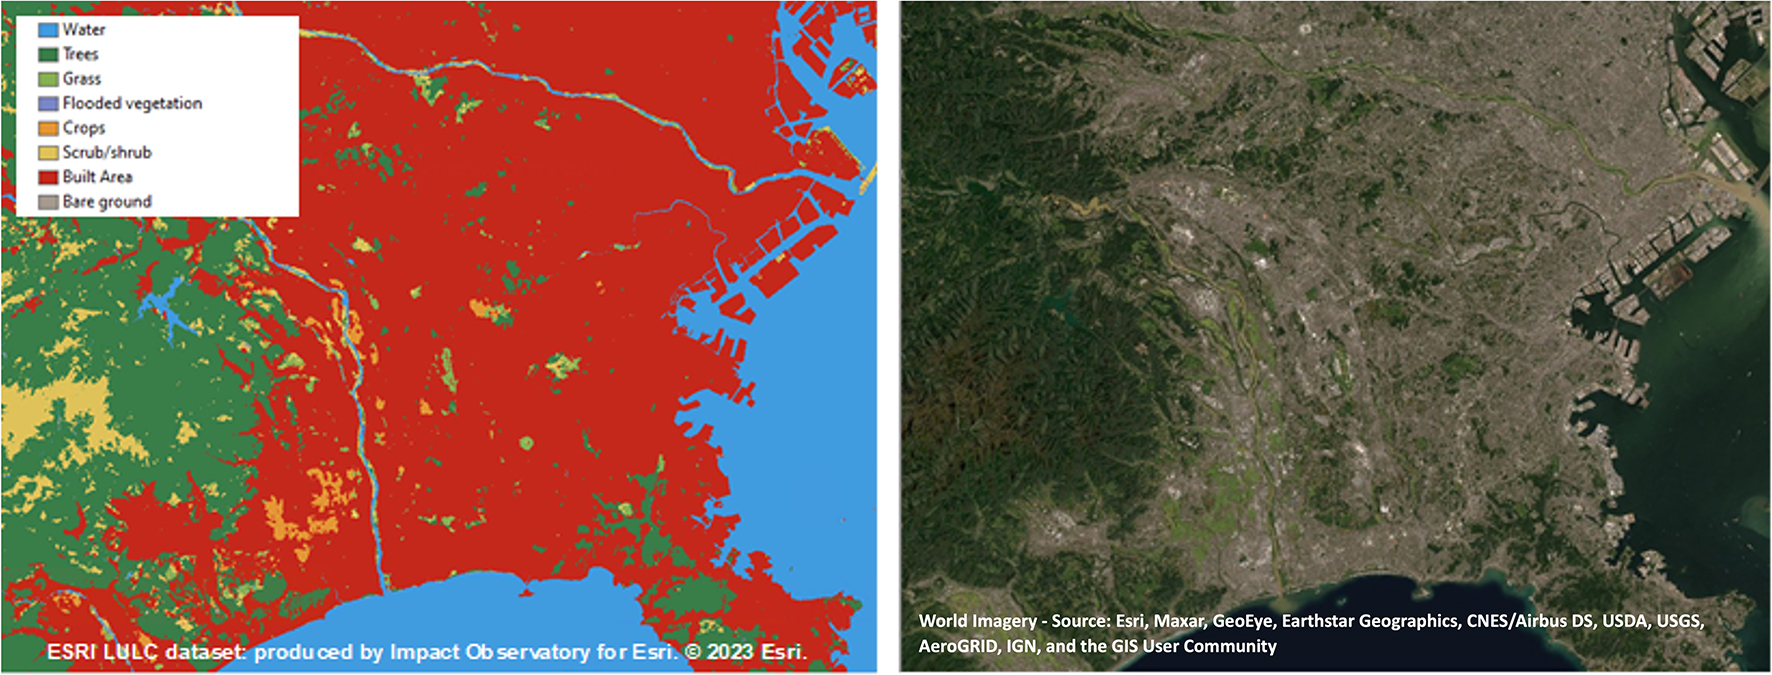 ESRI land cover dataset compared to aerial imagery